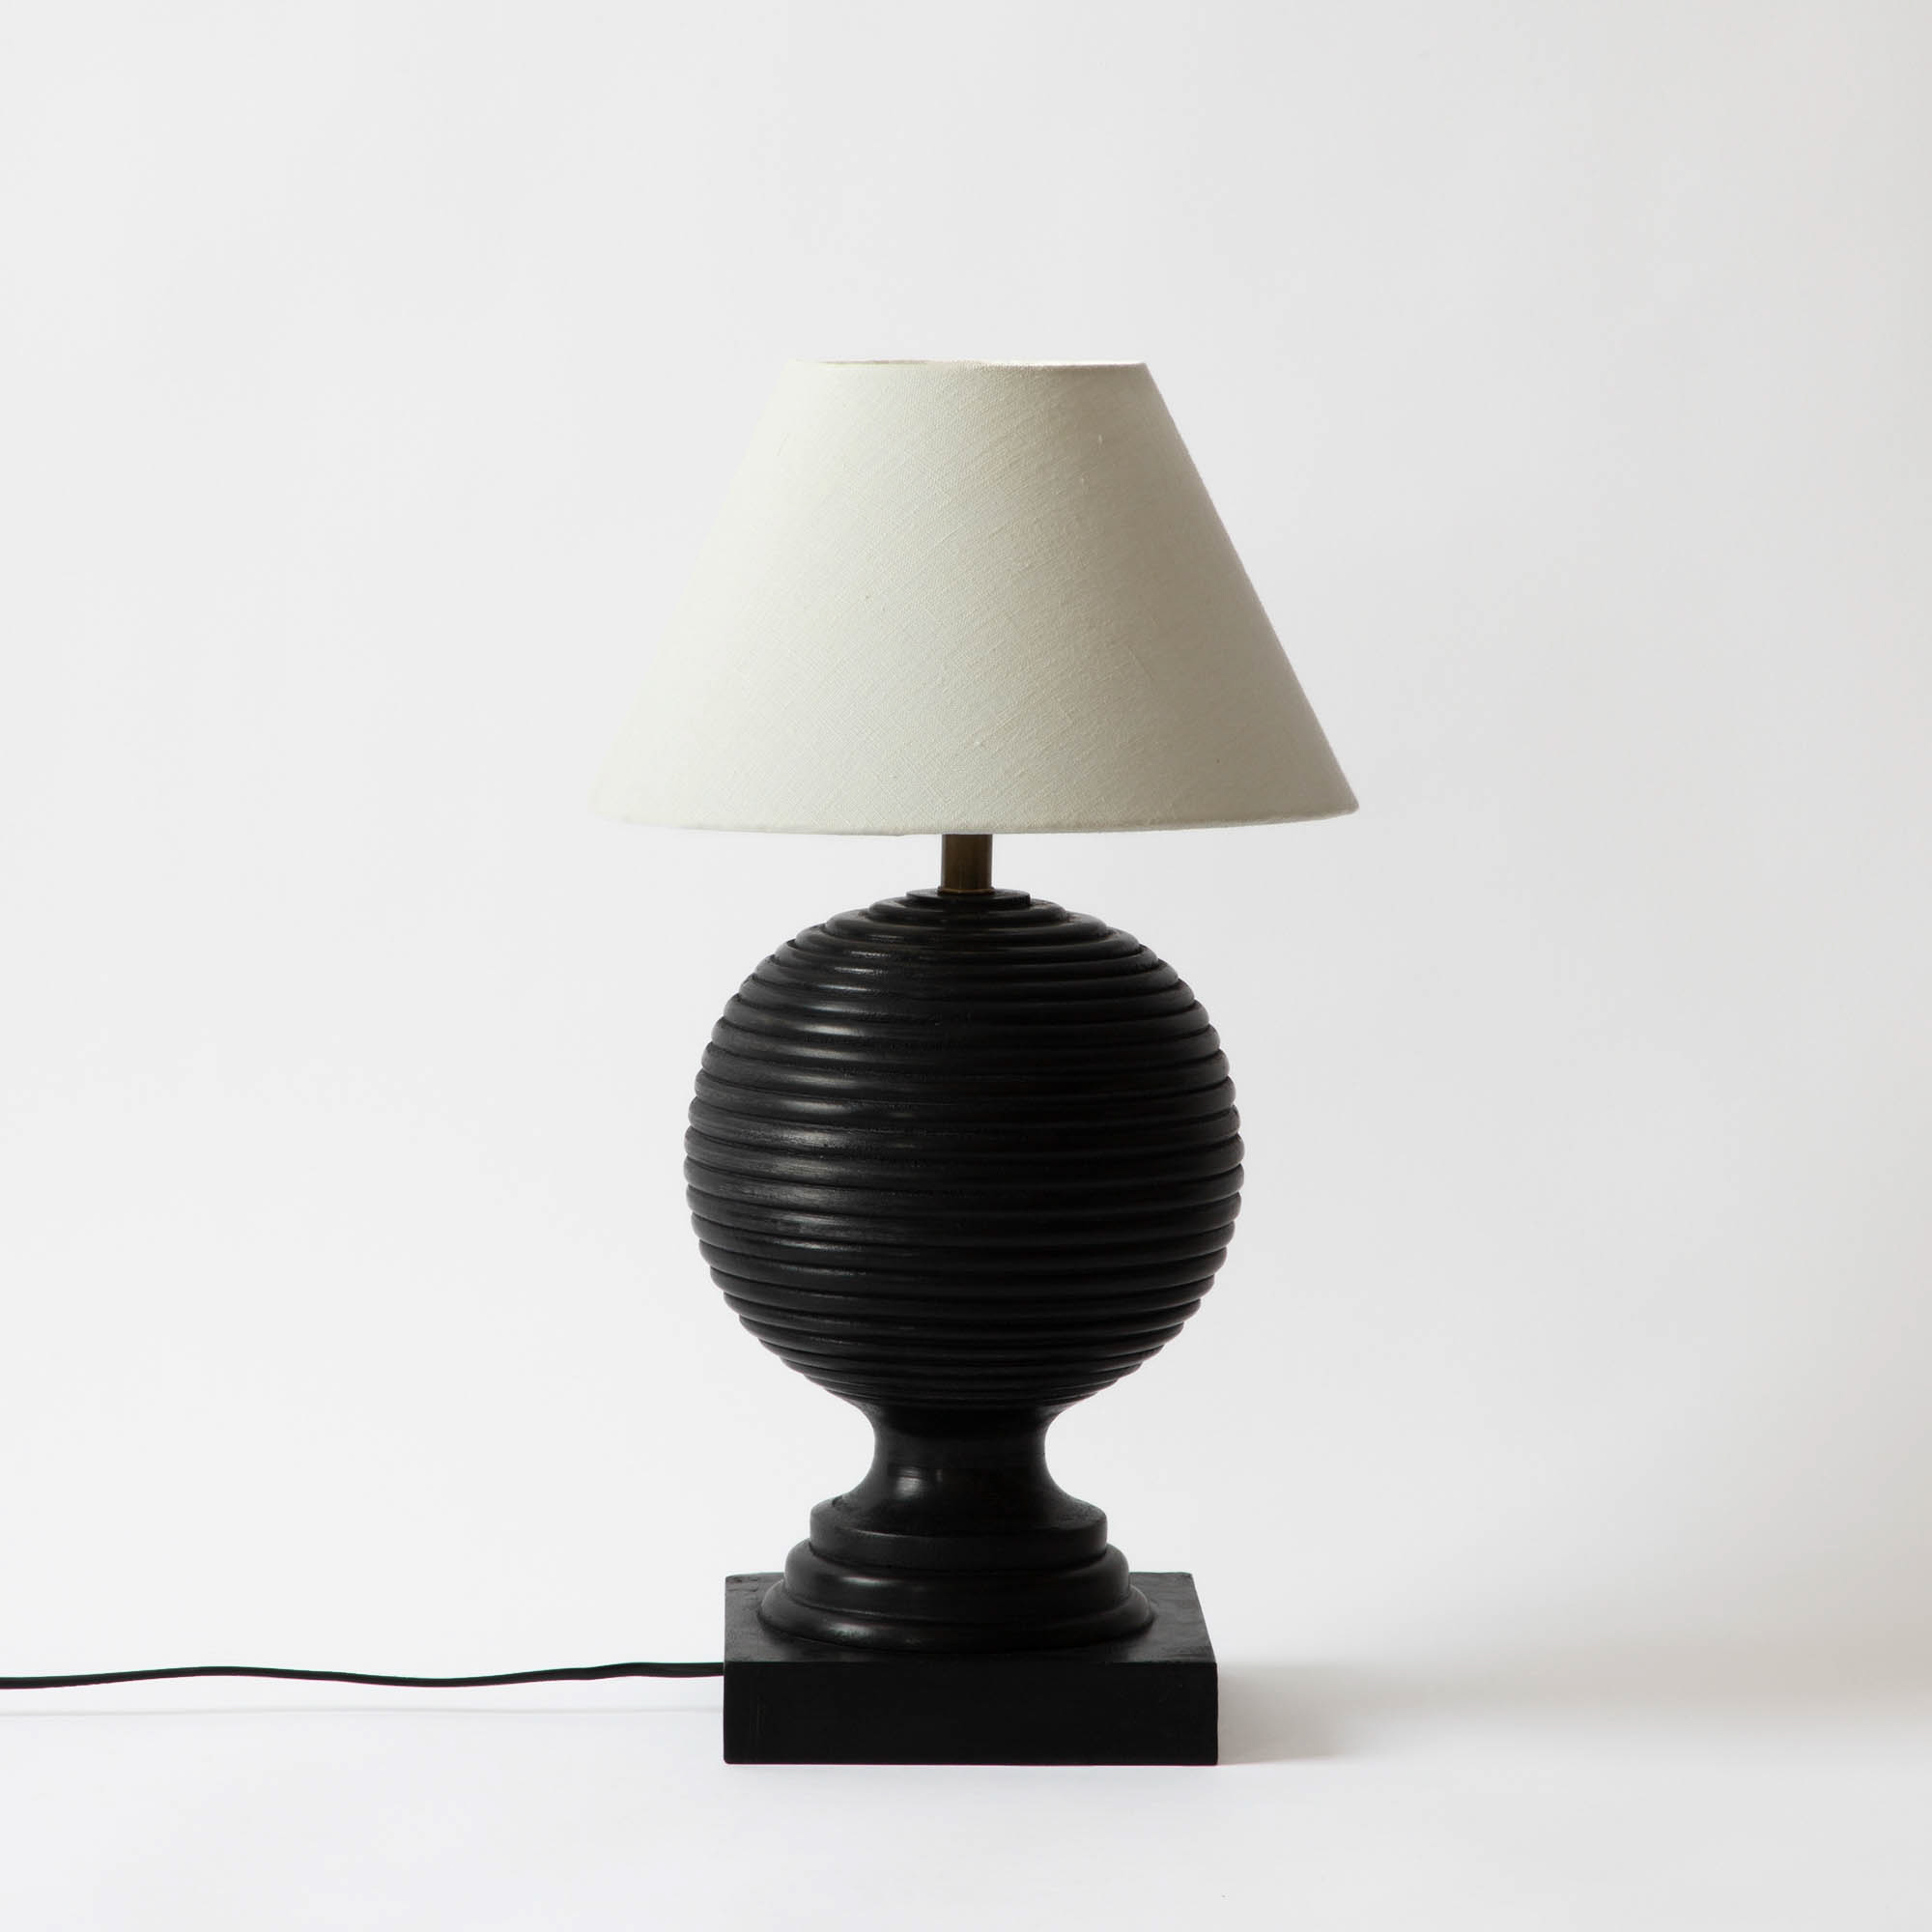 Cairo Wooden Table Lamp (Black)